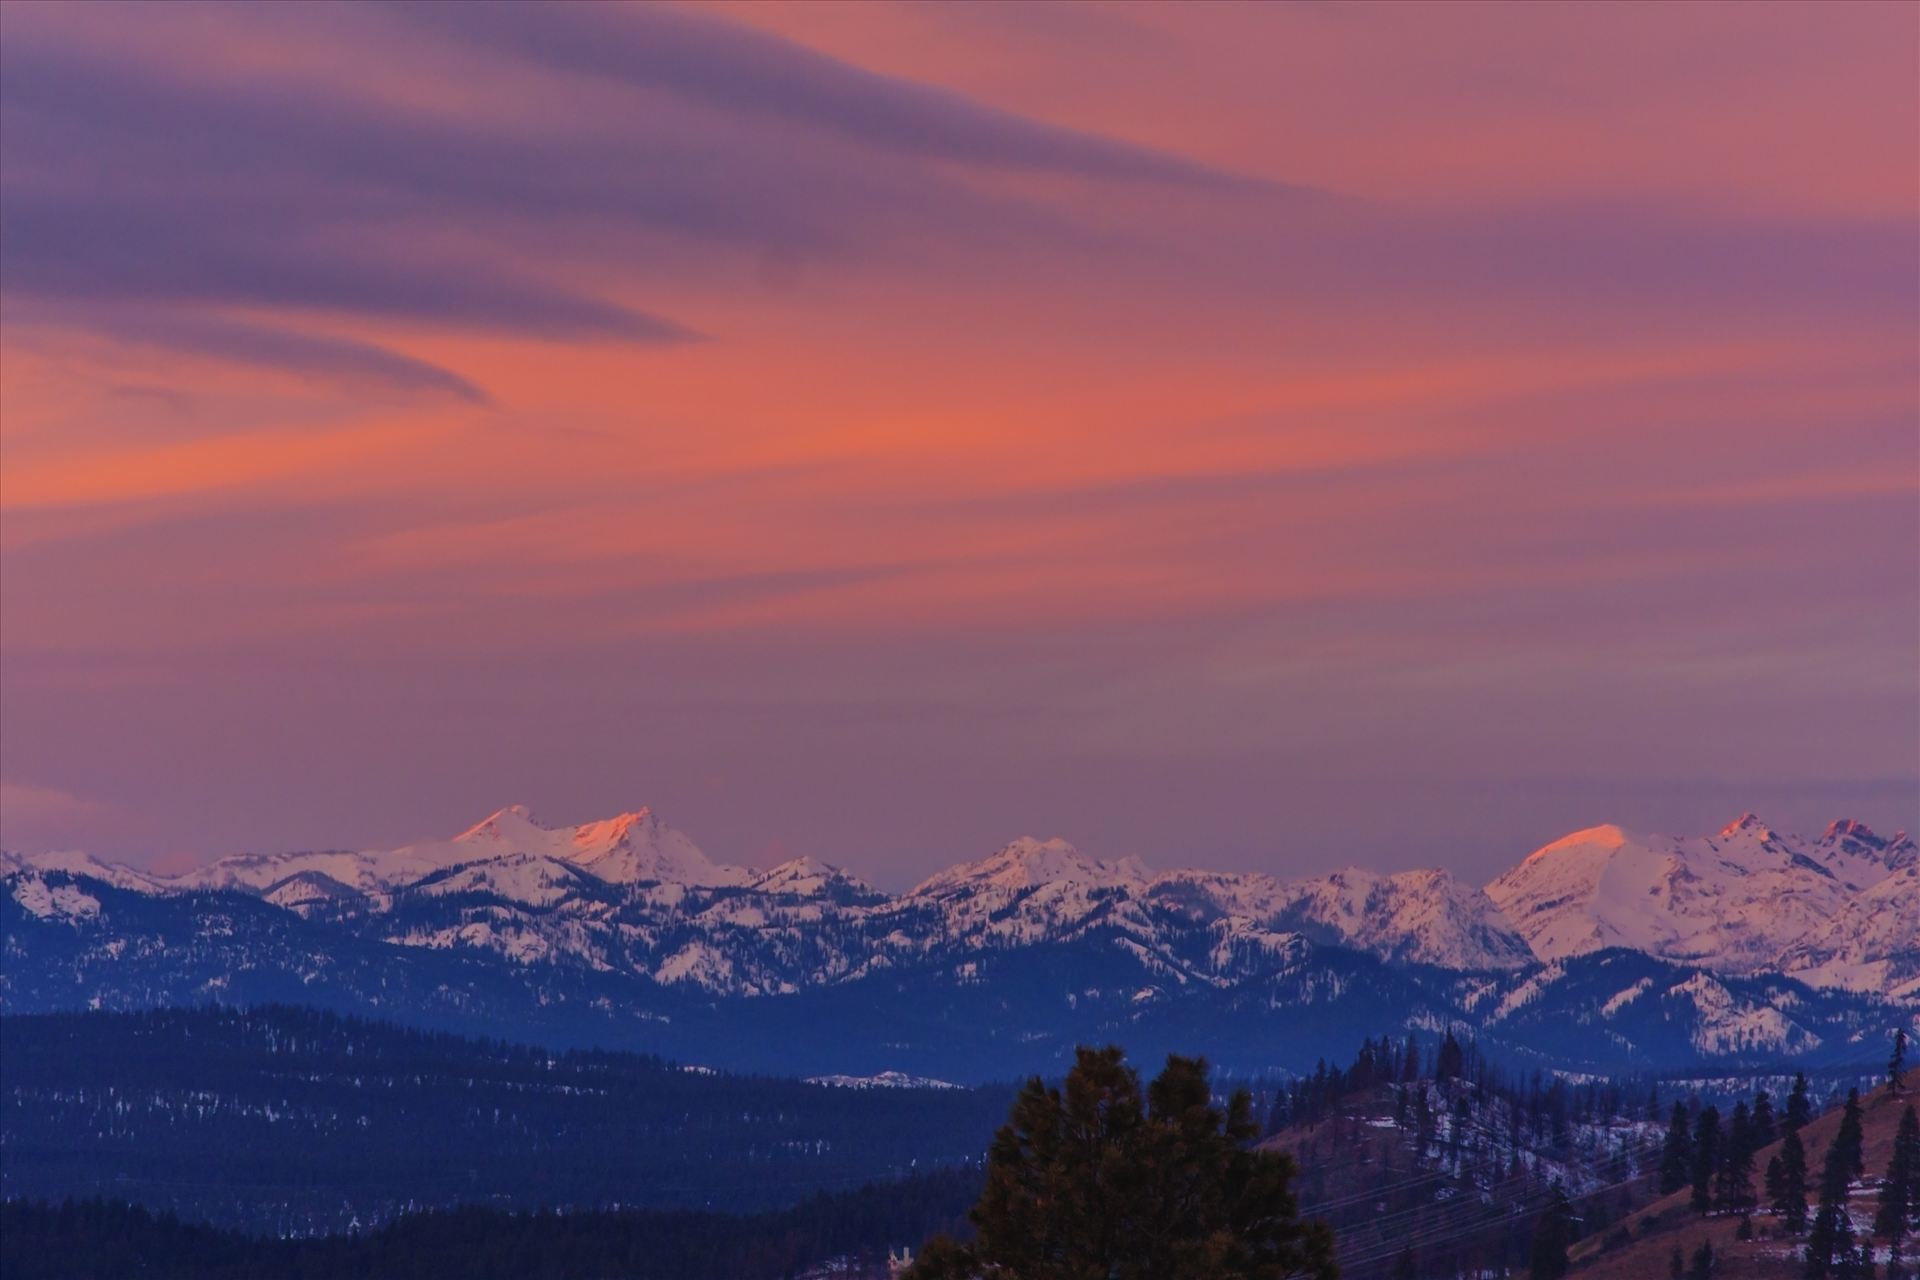 Sunset Over the Stuarts The mountains are the icon Stuart Range in Central Washington.  This was taken at sunset, as the clouds lit up and the setting sun shone on the snow capped peaks. by Bear Conceptions Photography